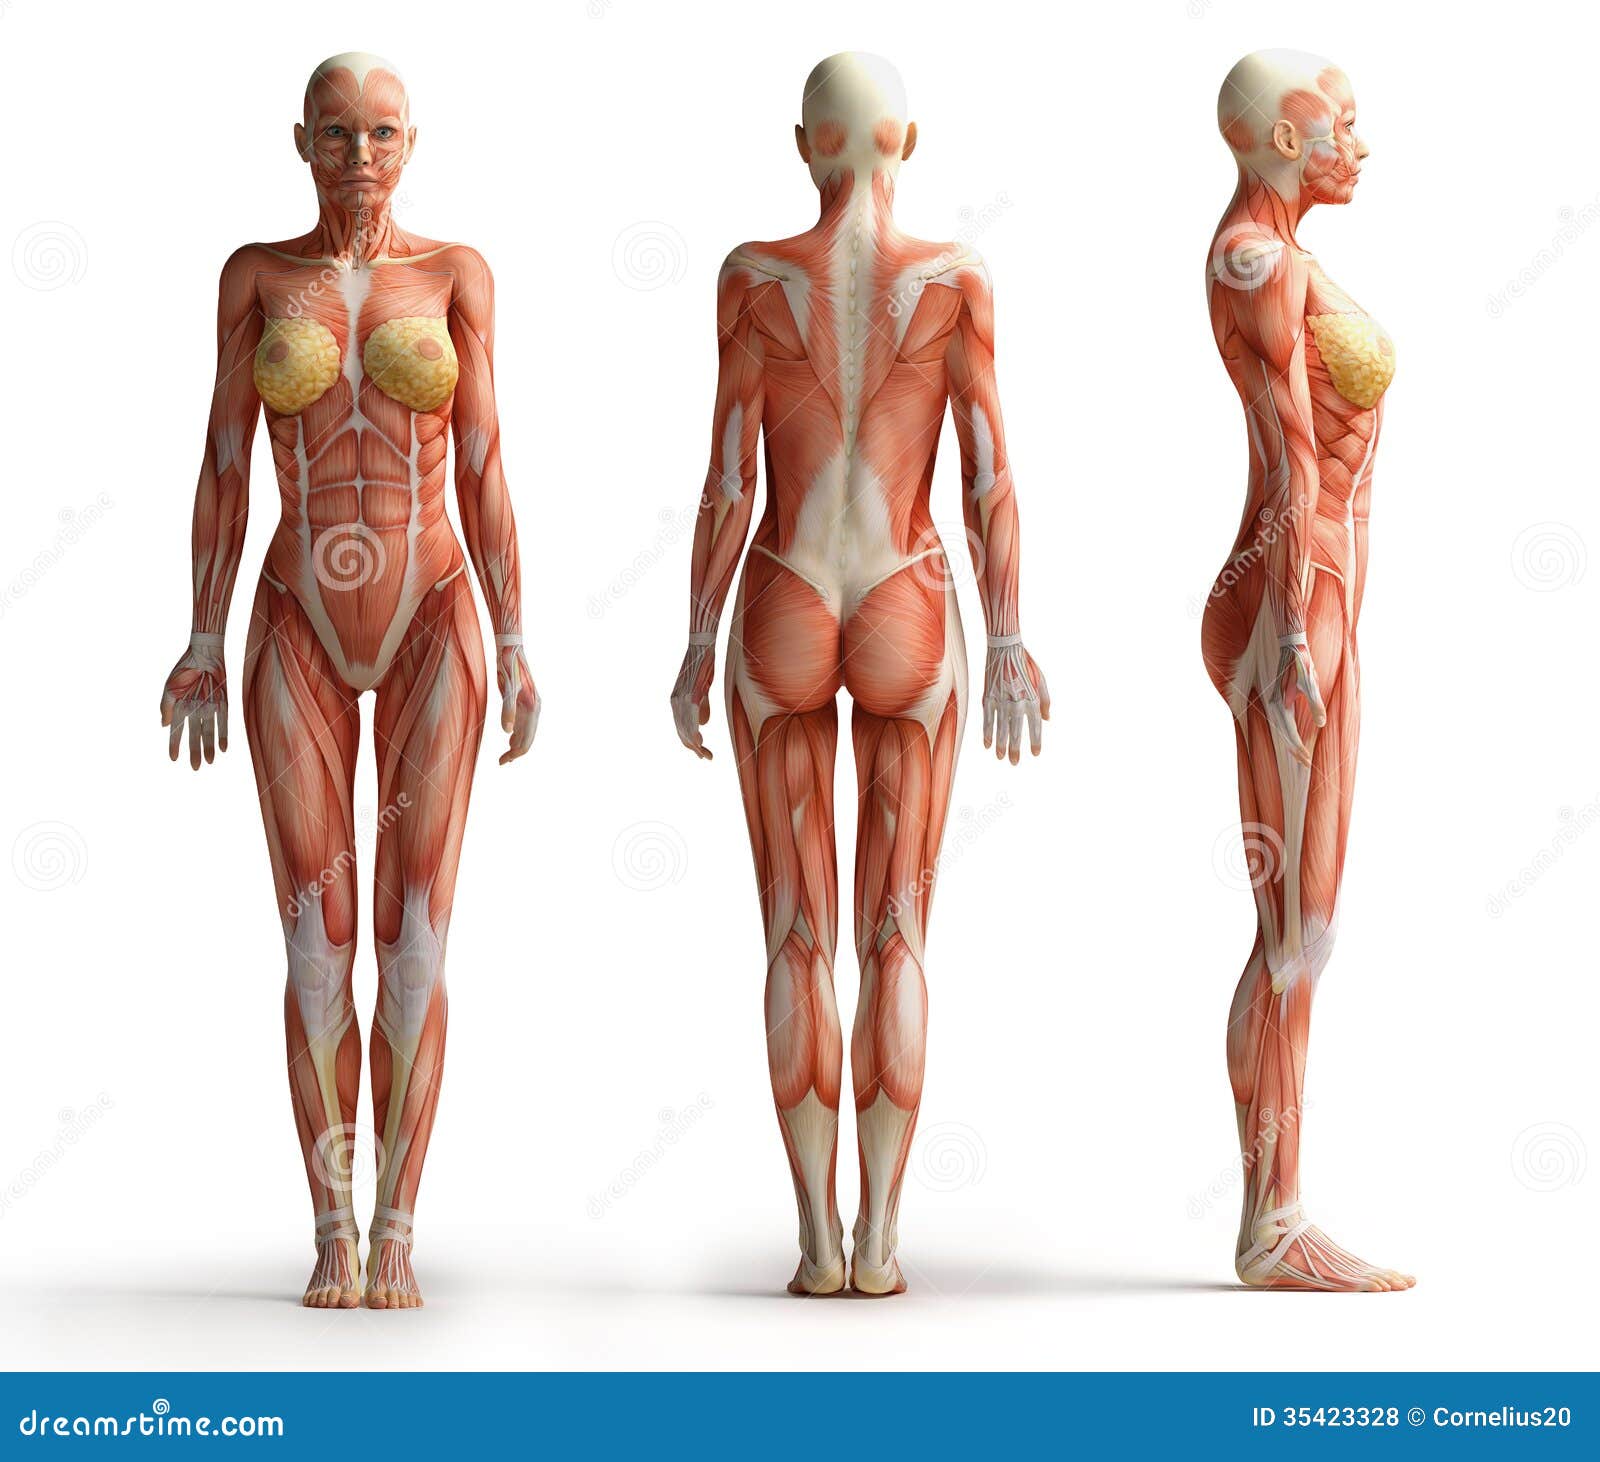 female-anatomy-view-front-back-side-35423328.jpg